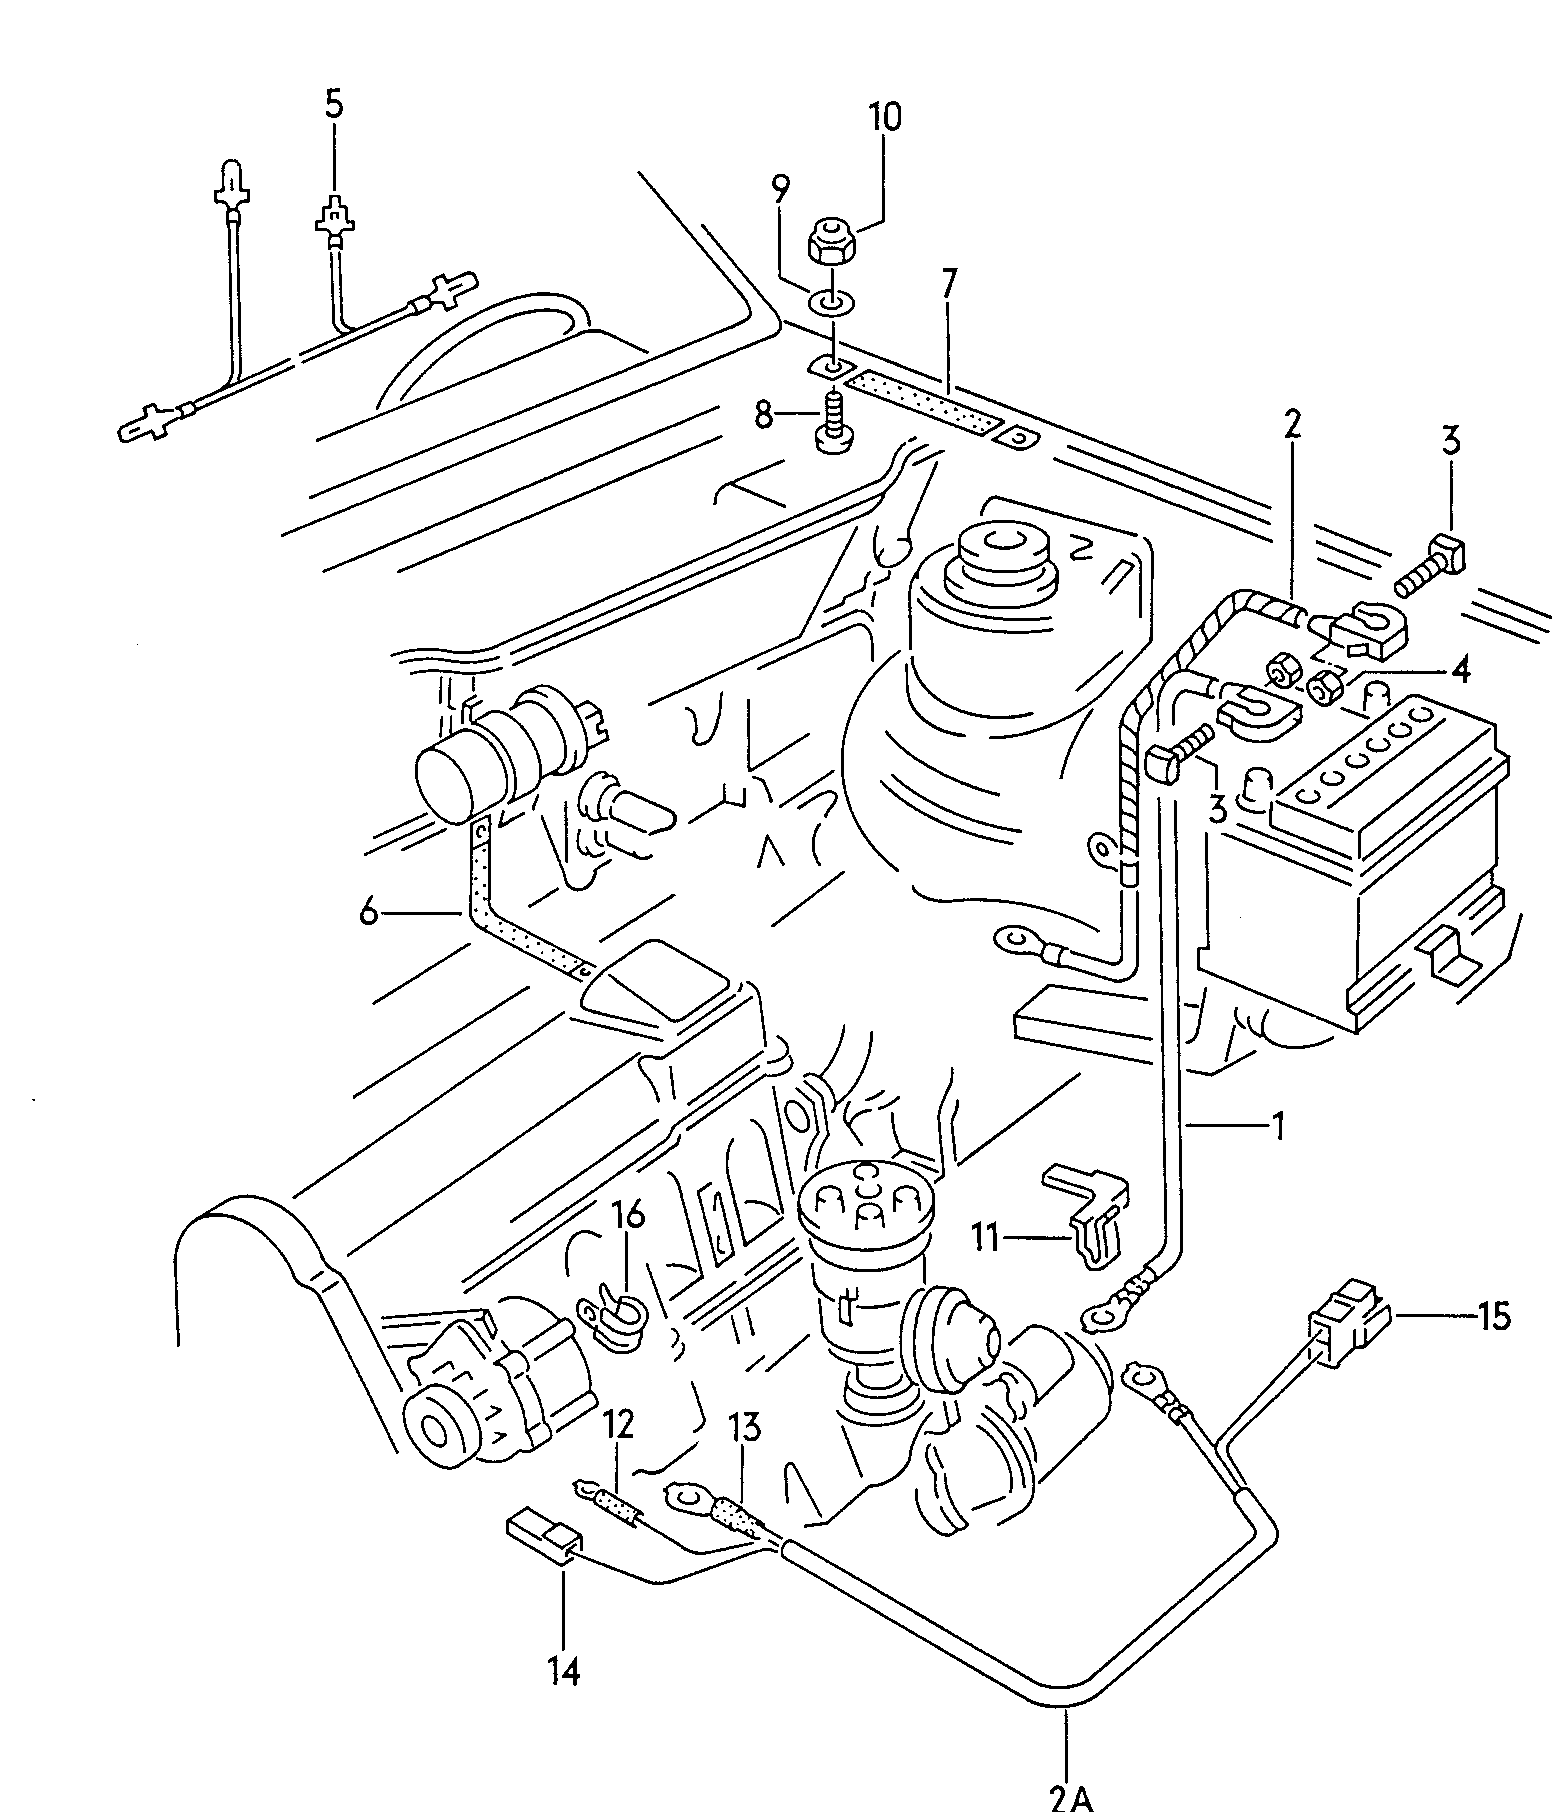 Wiring set for battery<br>and 3-phase alternatorEarth line  - Scirocco - sci